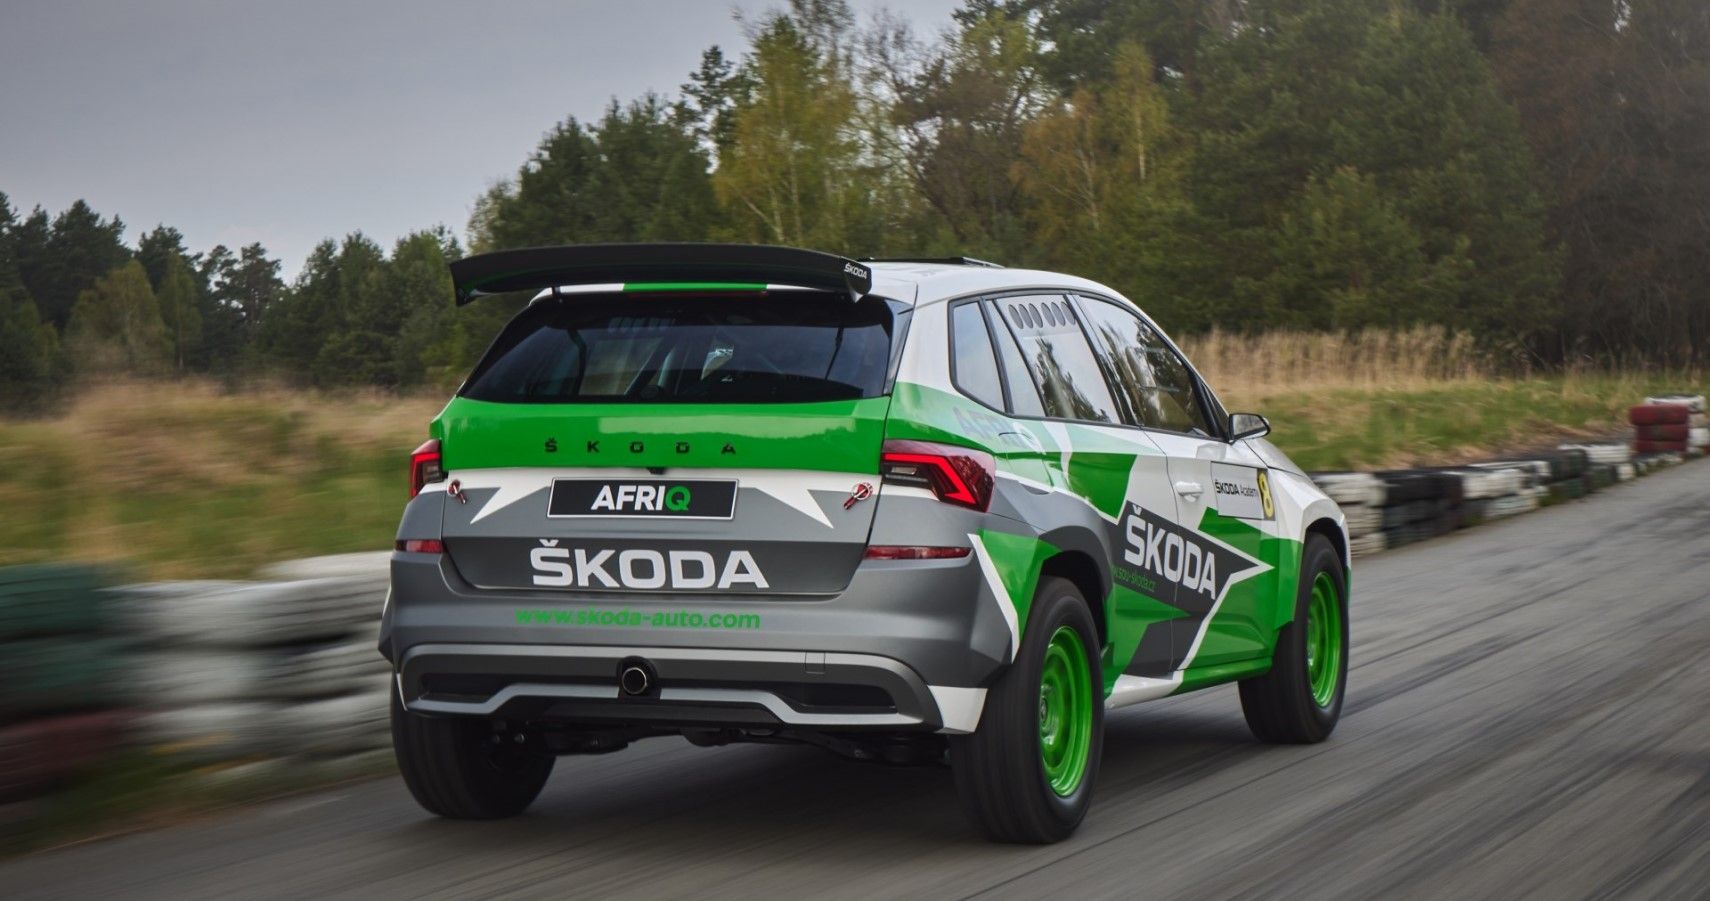 Skoda Afriq accelerates on the track seen from the rear third quarter